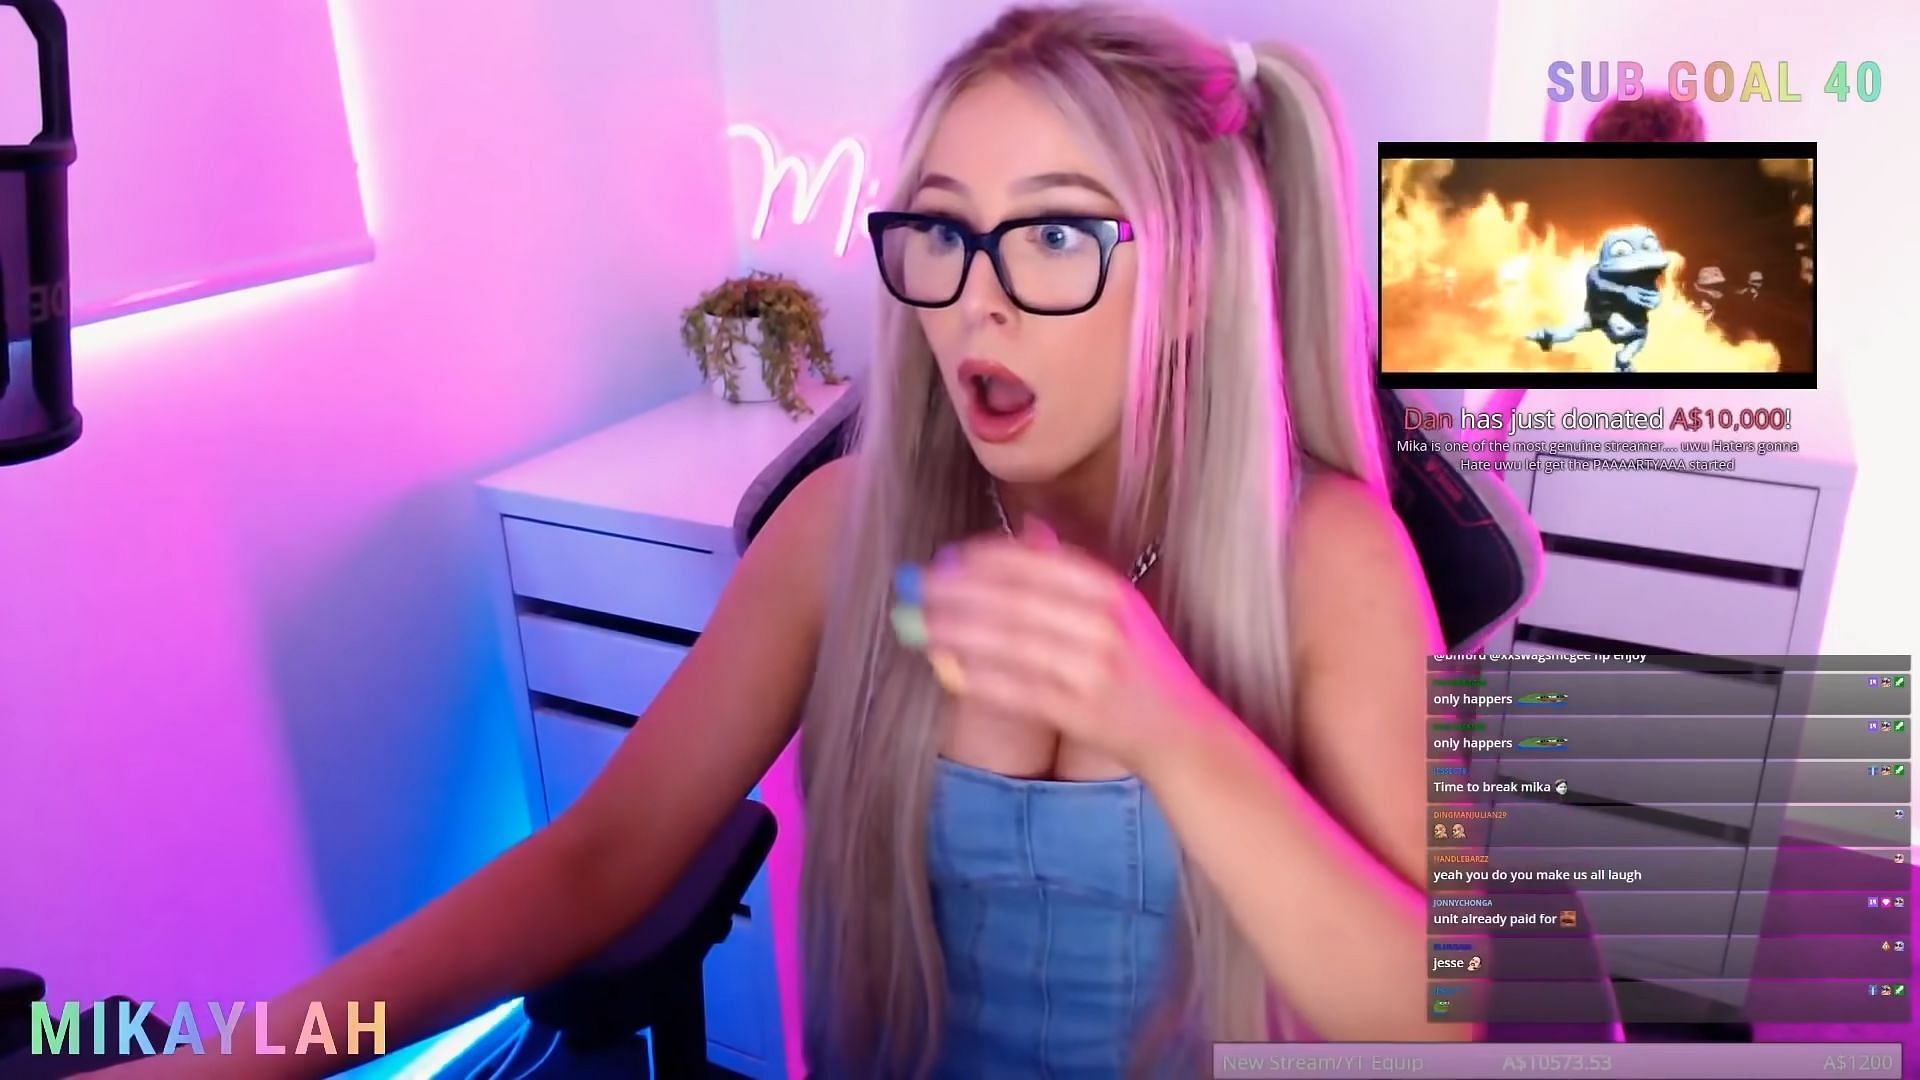 Mikaylah was shocked after receiving a massive donation (Image via YouTube)